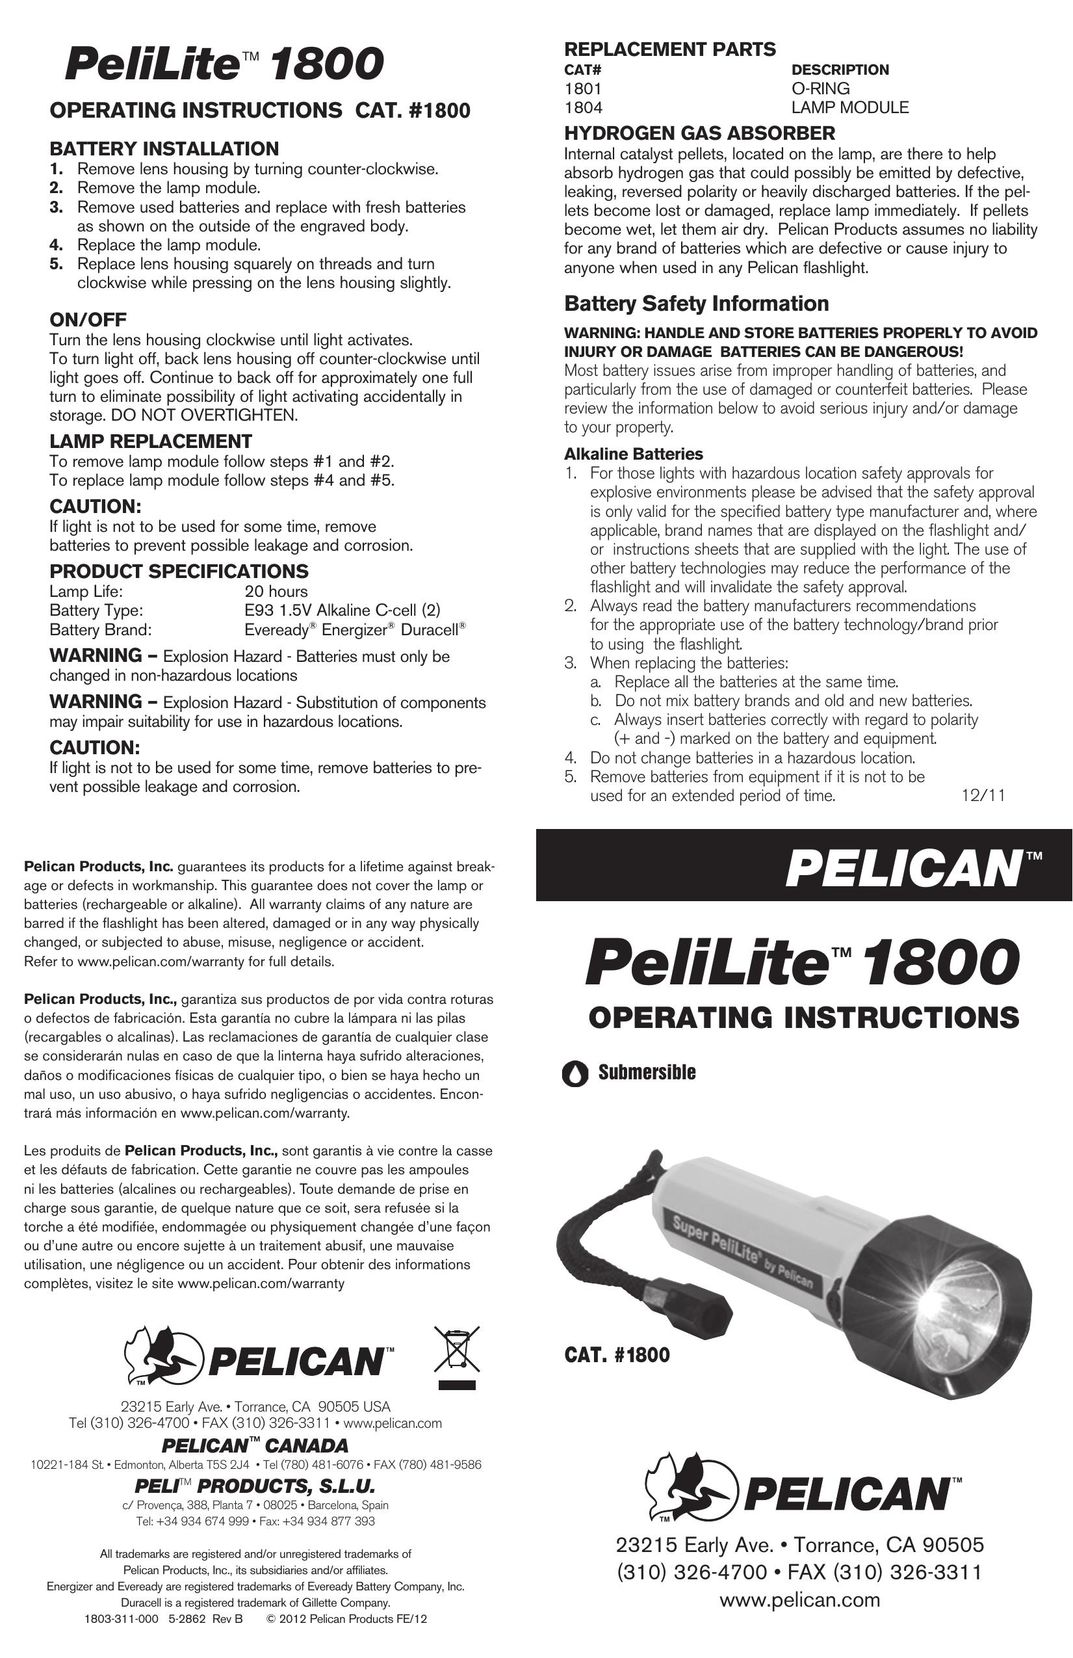 Pelican 1800 Home Safety Product User Manual